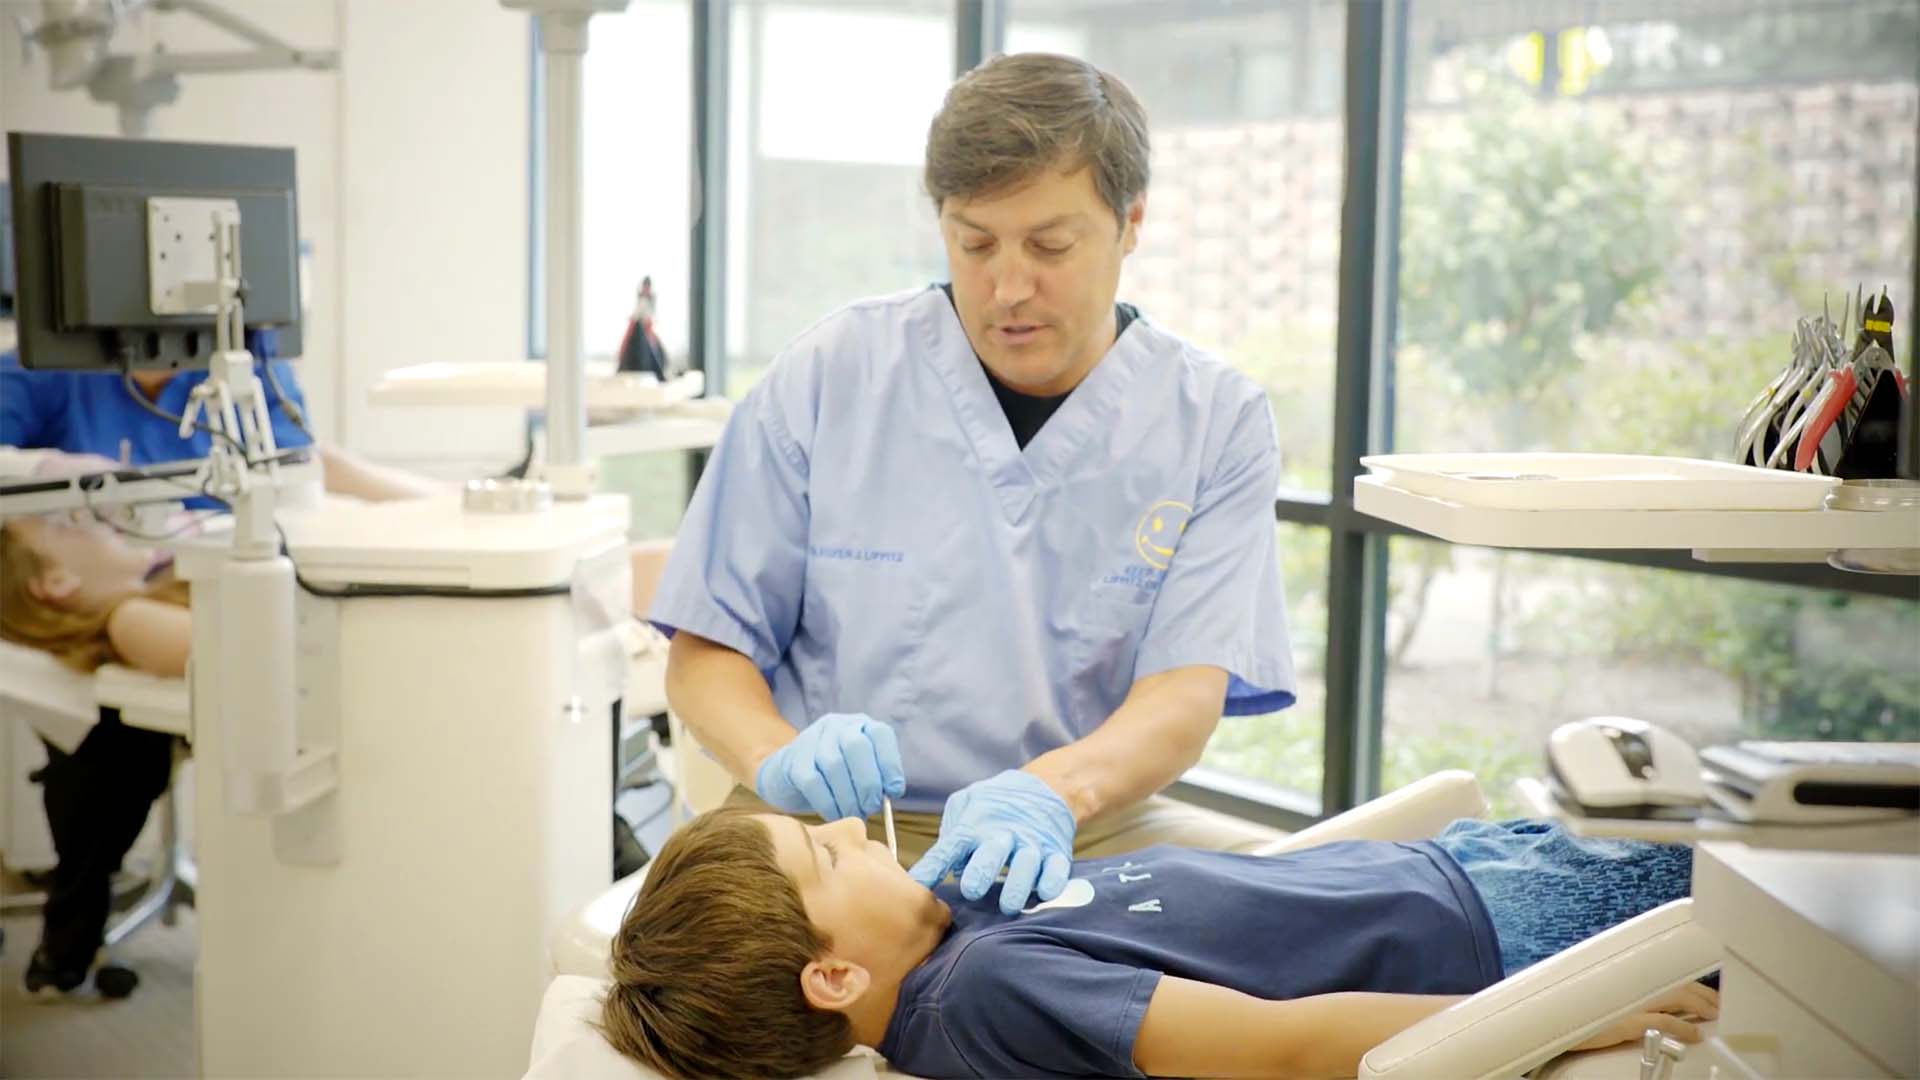 Dr Lippitz performs an orthodontic examination of a patient from Kenilworth